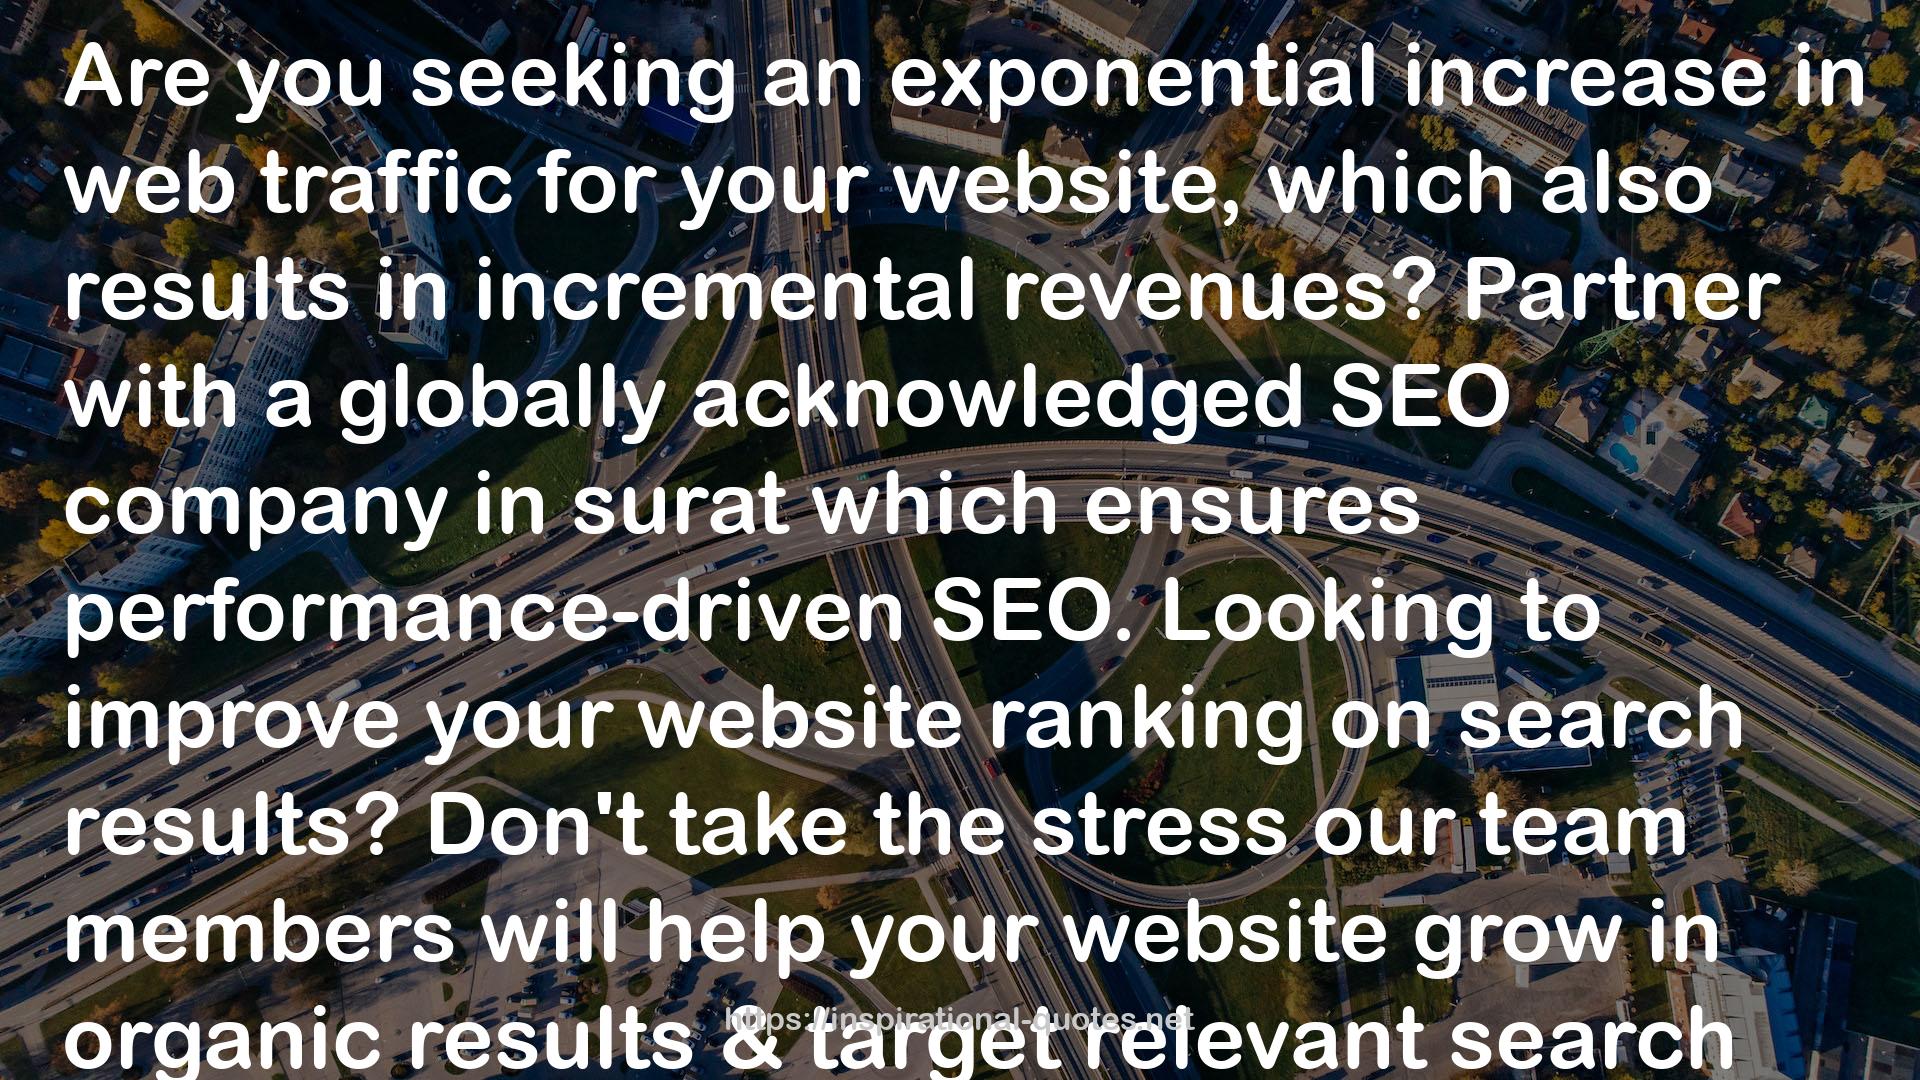 http://www.unlockgrow.com/seo-services-in-surat/ QUOTES